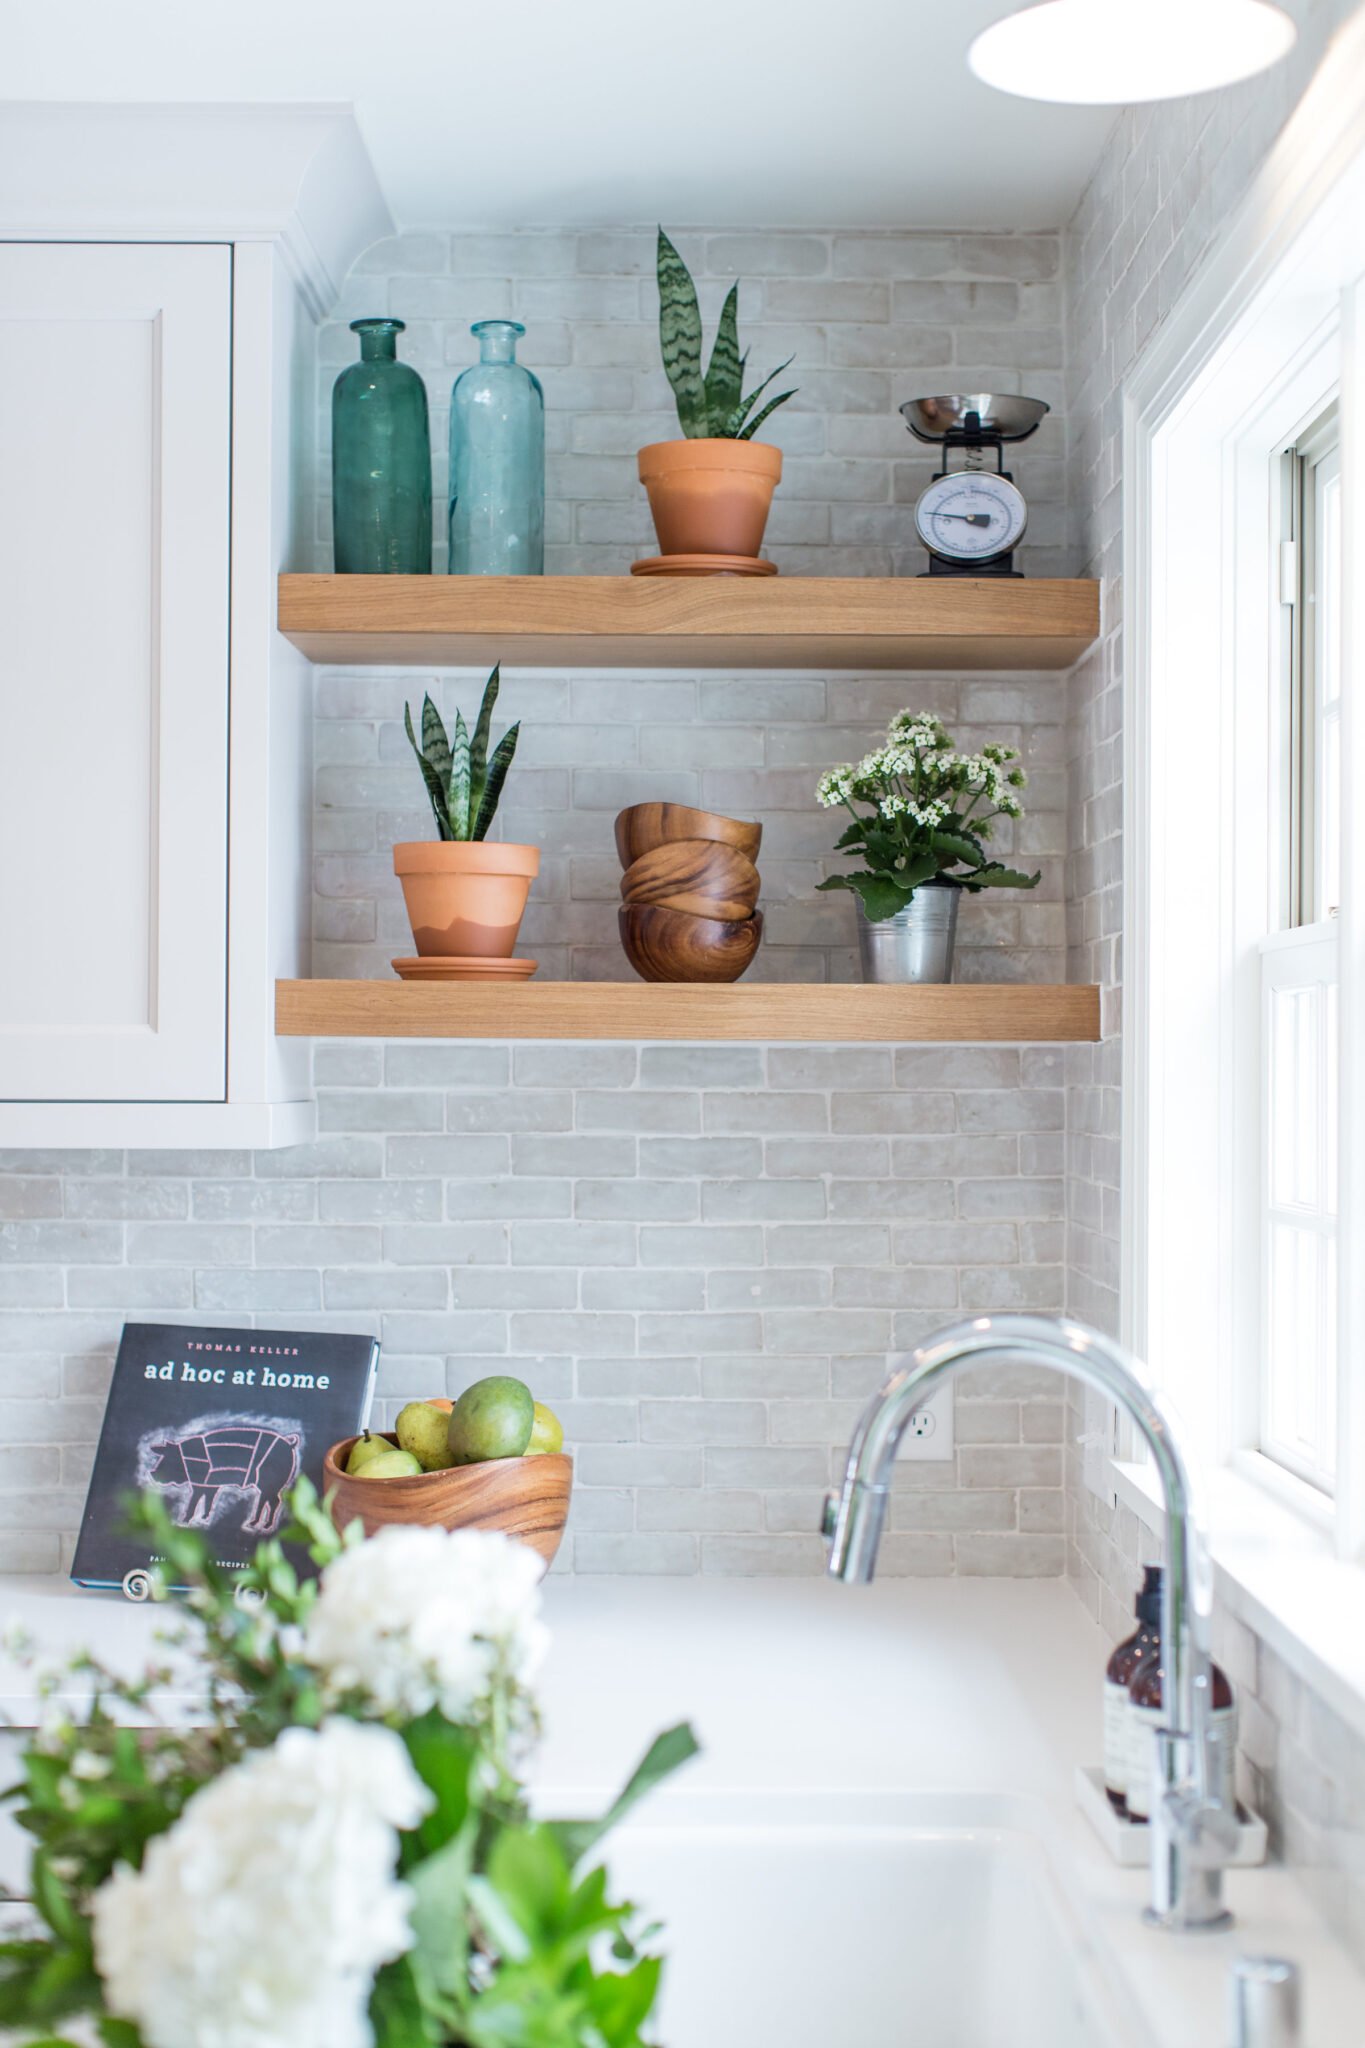 white kitchen with floating shelves and plants in terra cot pots